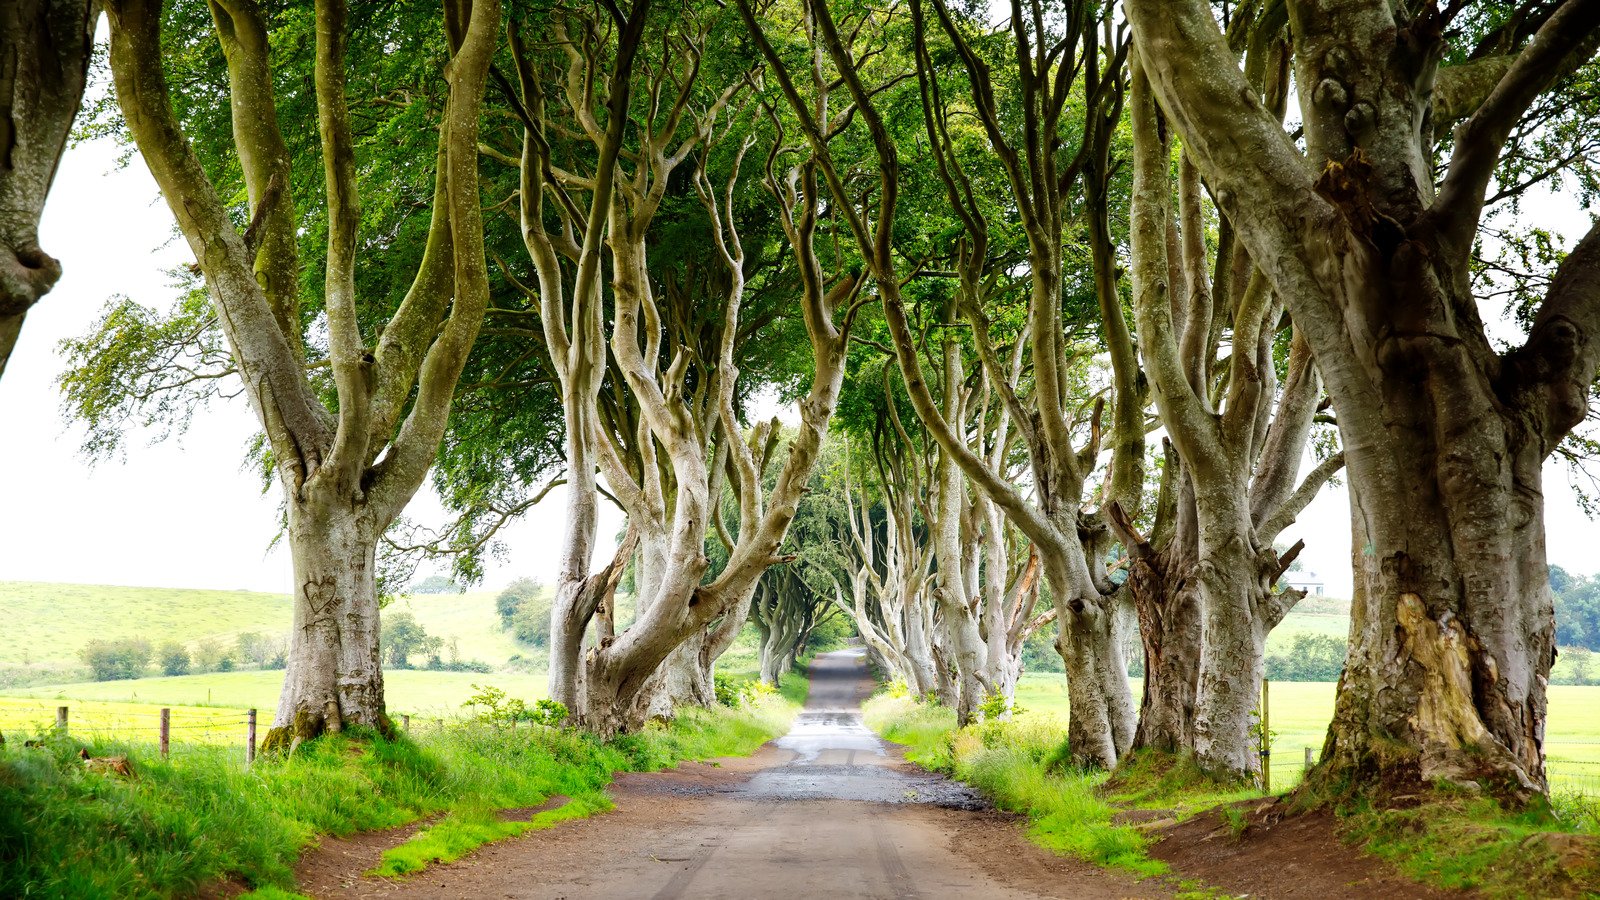 Bregagh Road Is The Most-Photographed Destination In Northern Ireland